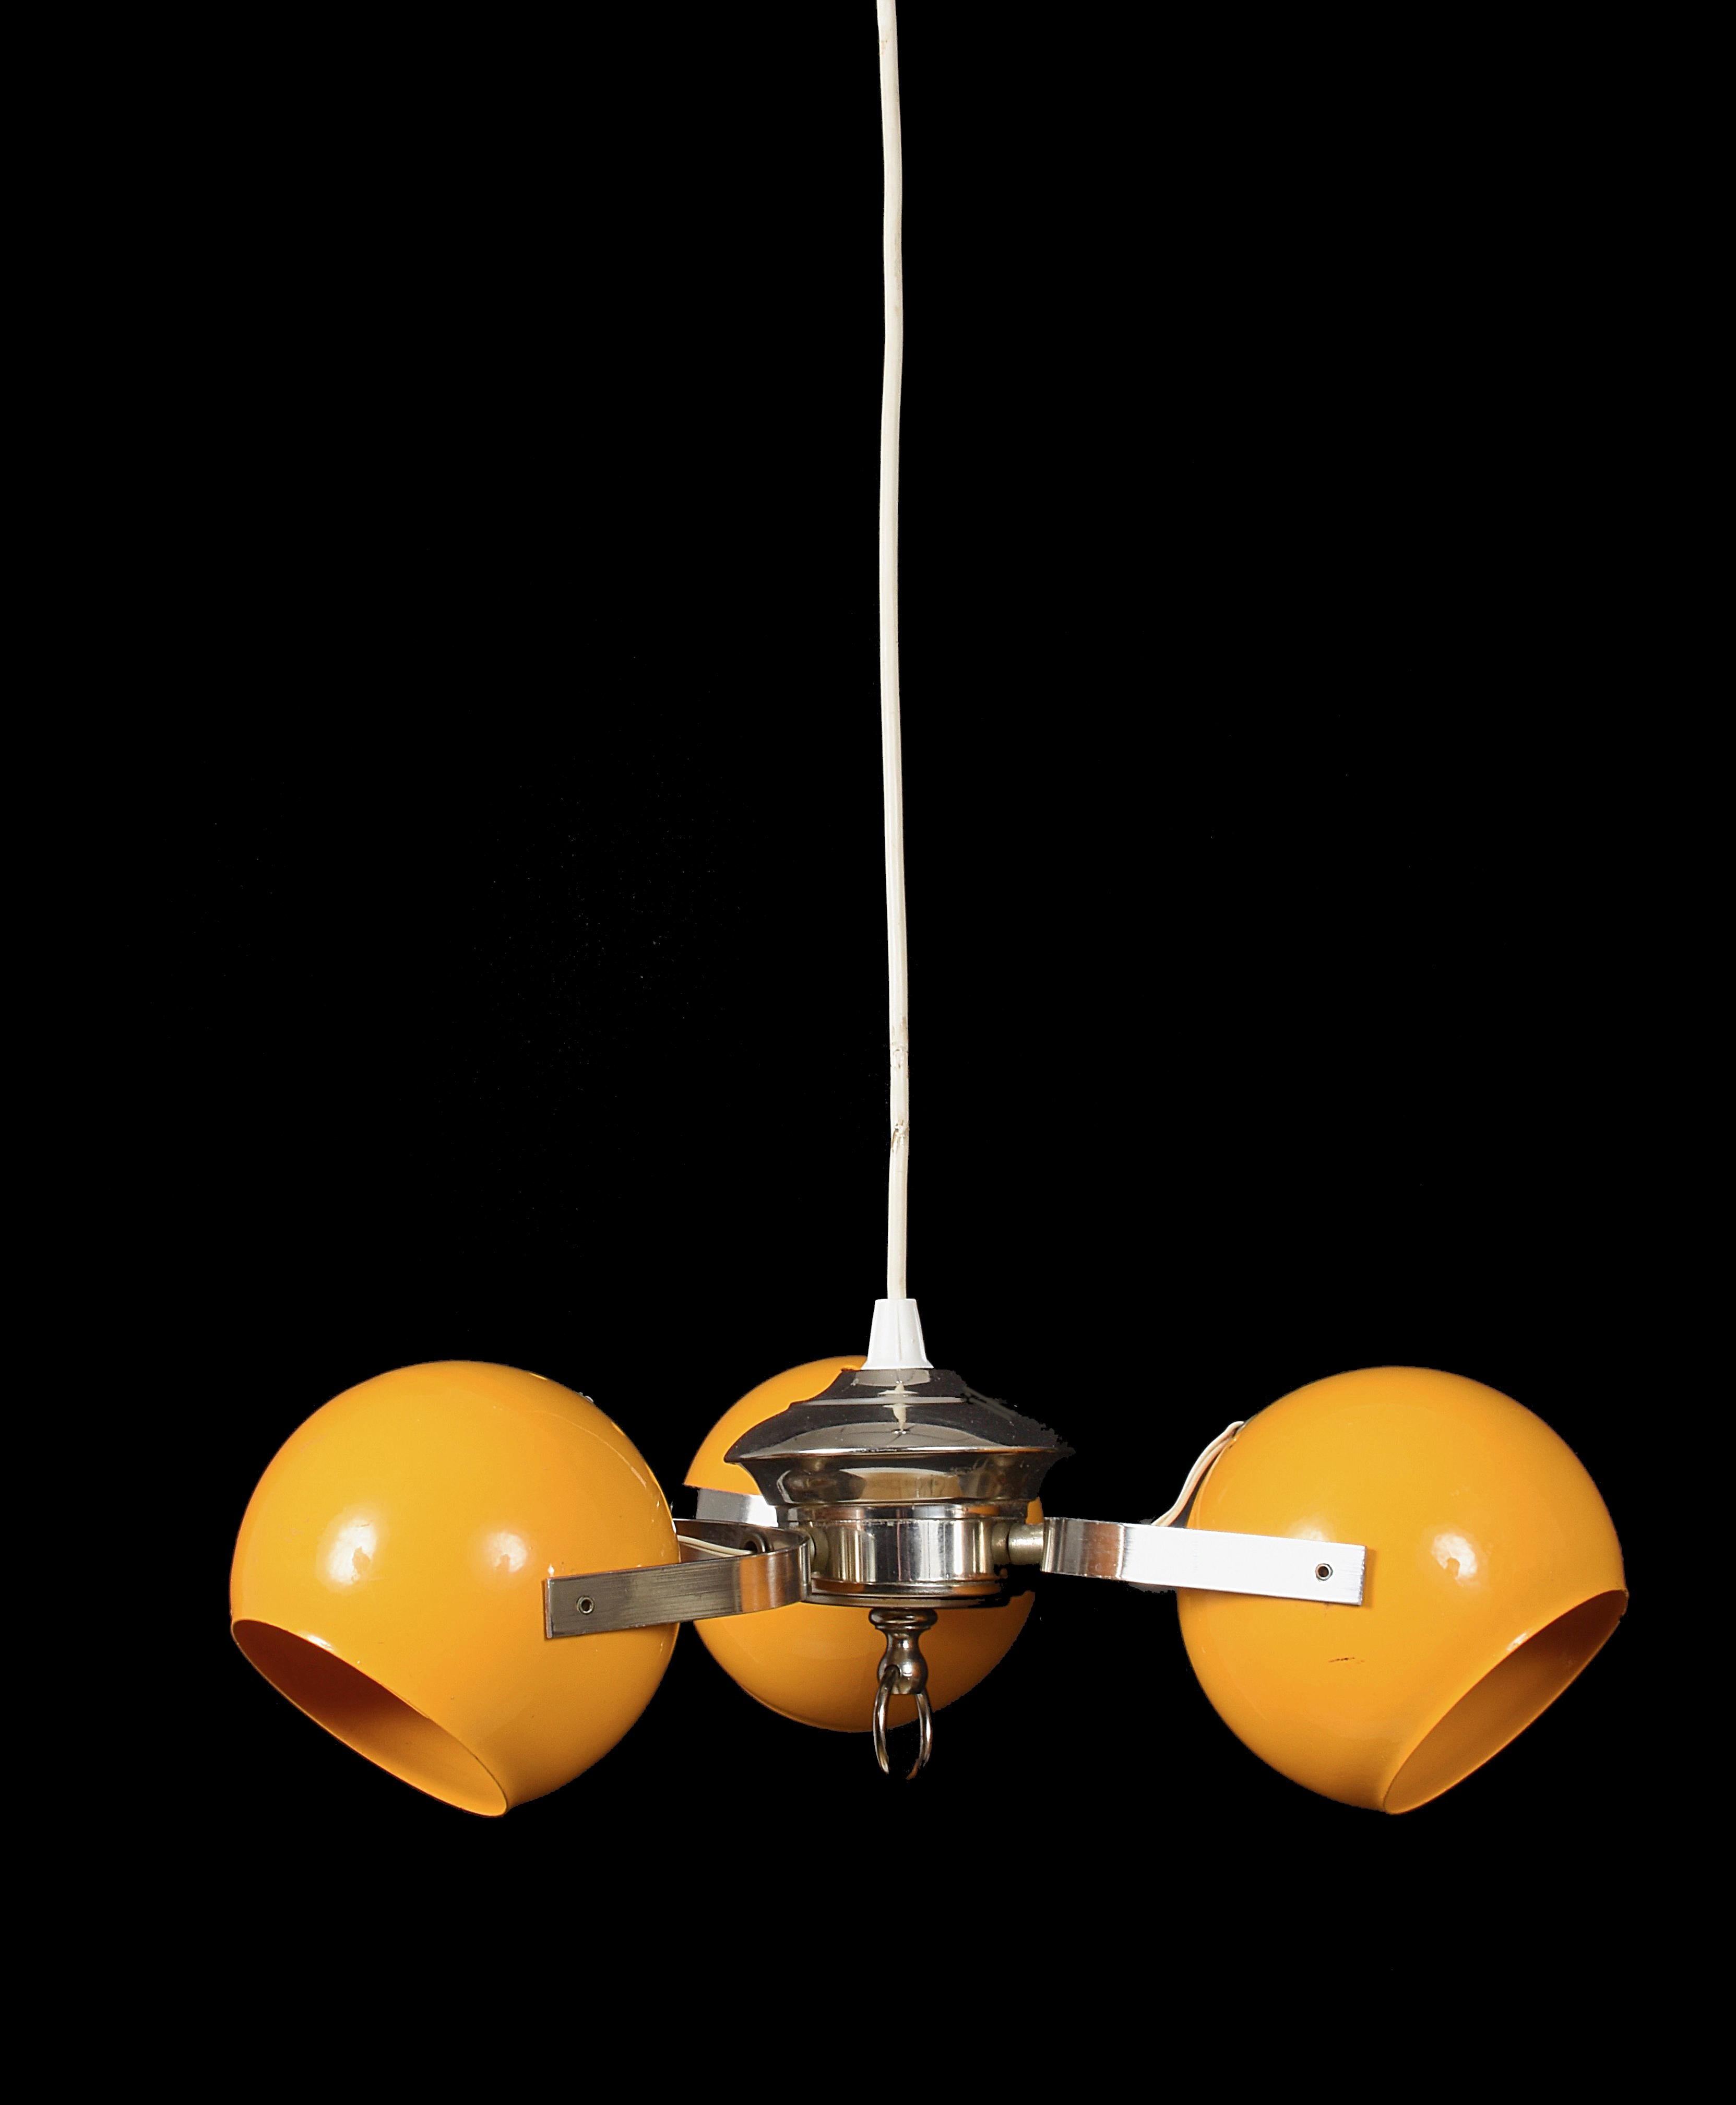 Chandelier with Three Adjustable Lights Yellow and Chrome, Italy, 1970s (Moderne der Mitte des Jahrhunderts)